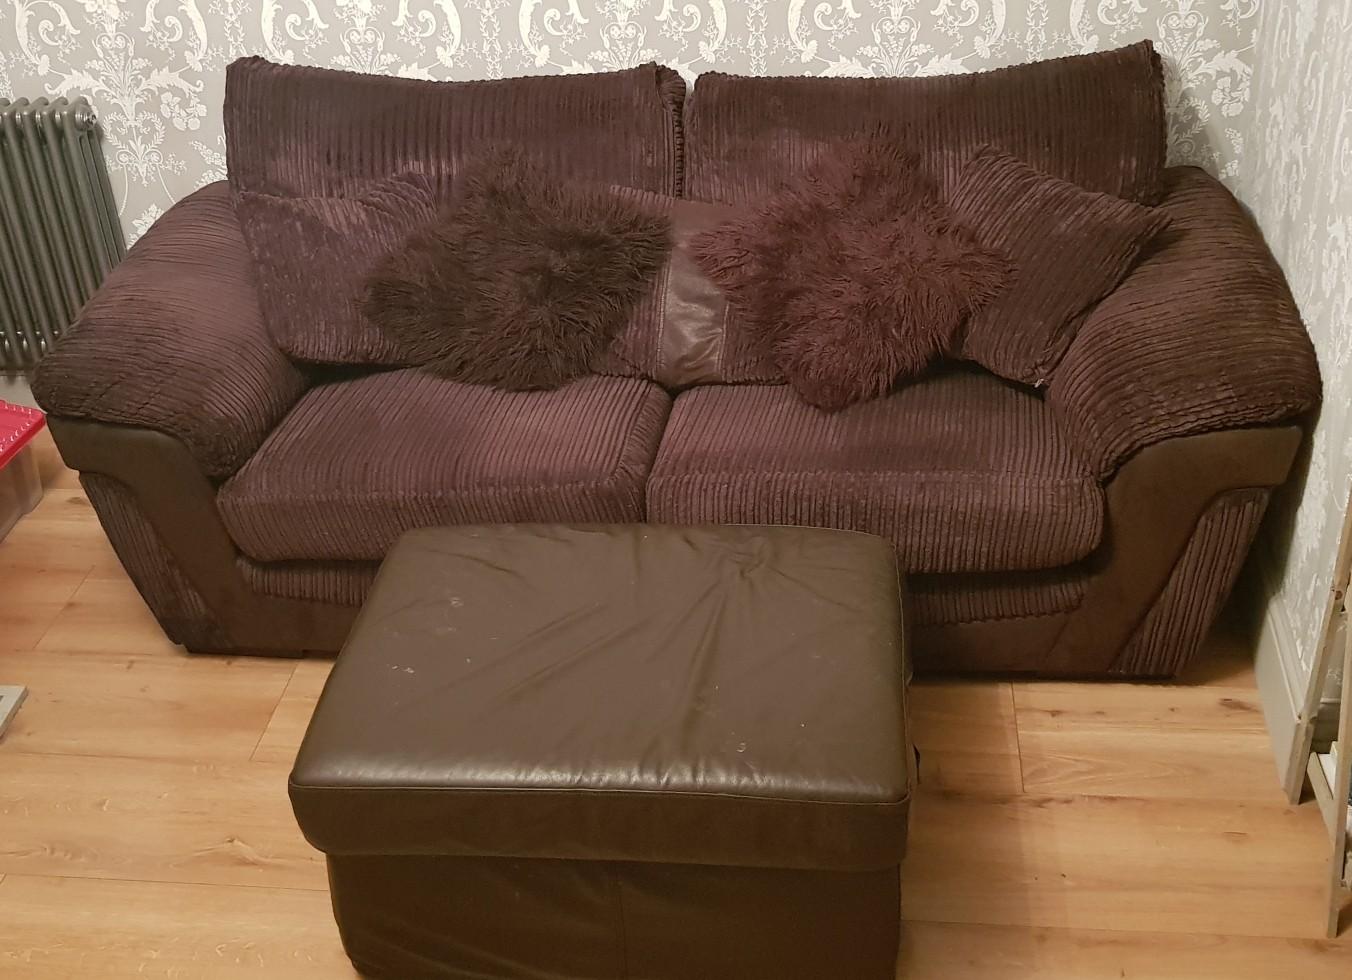 3 2 Seater Fabric Sofa Need Gone Asap In De56 Valley Fur 120